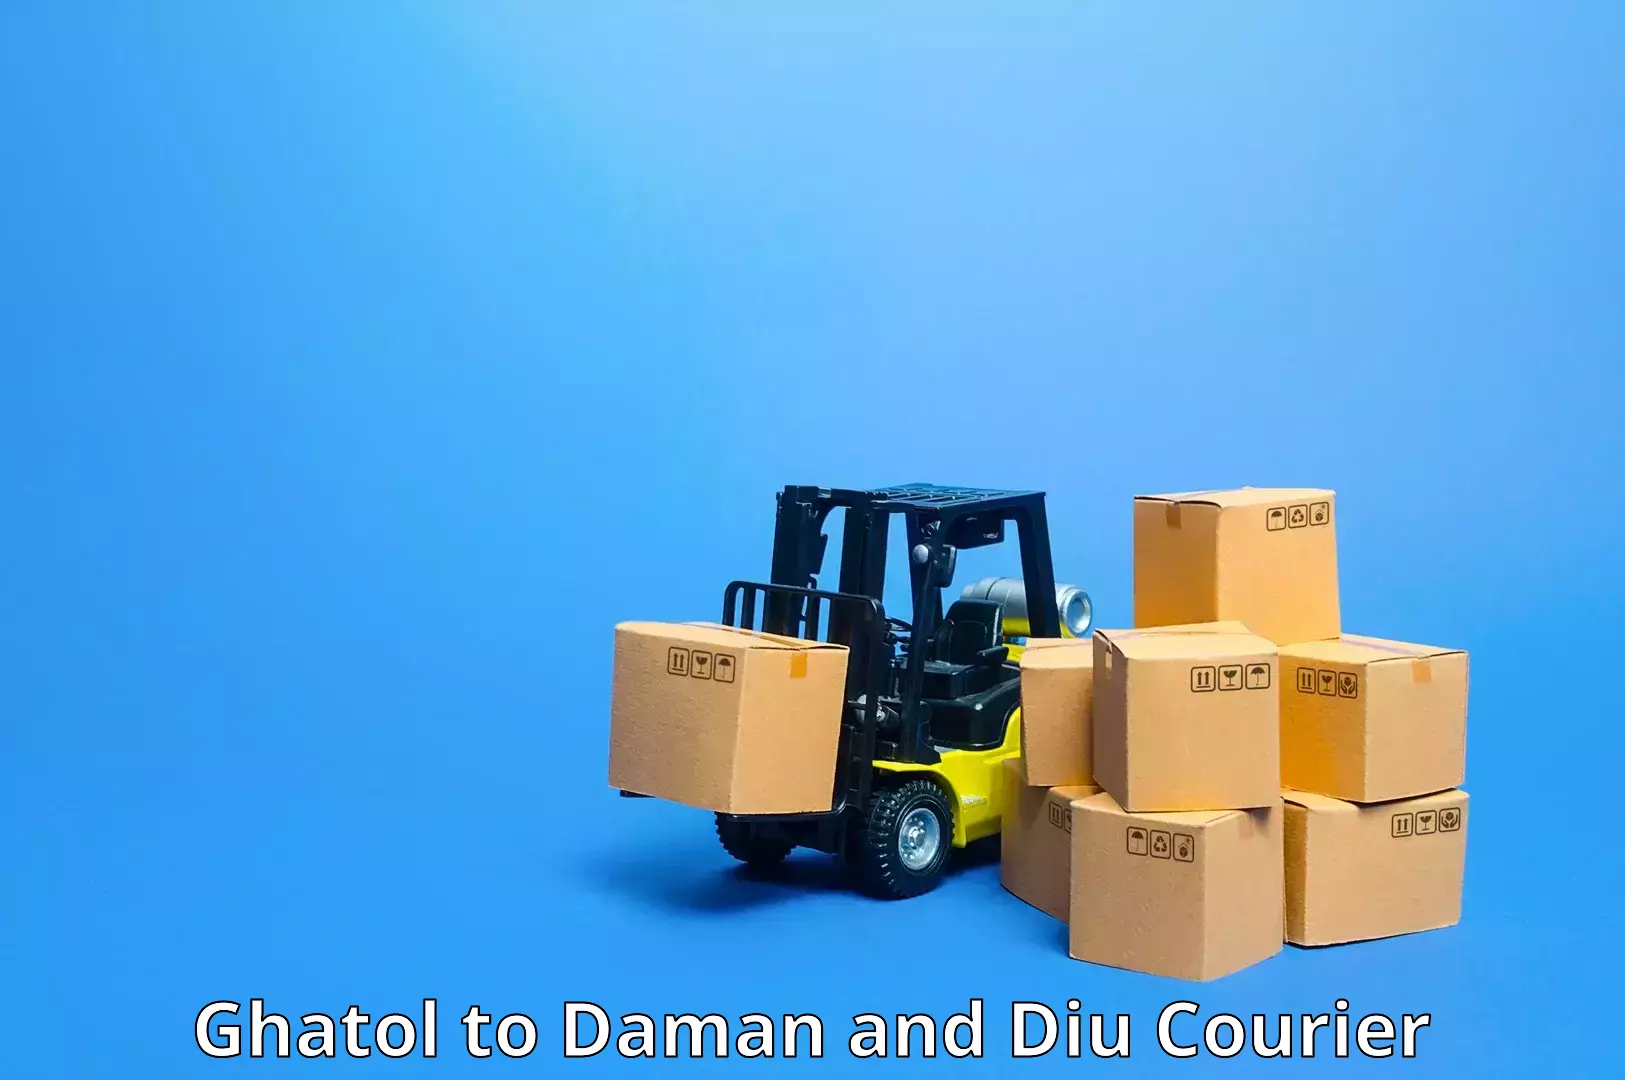 Efficient order fulfillment in Ghatol to Diu